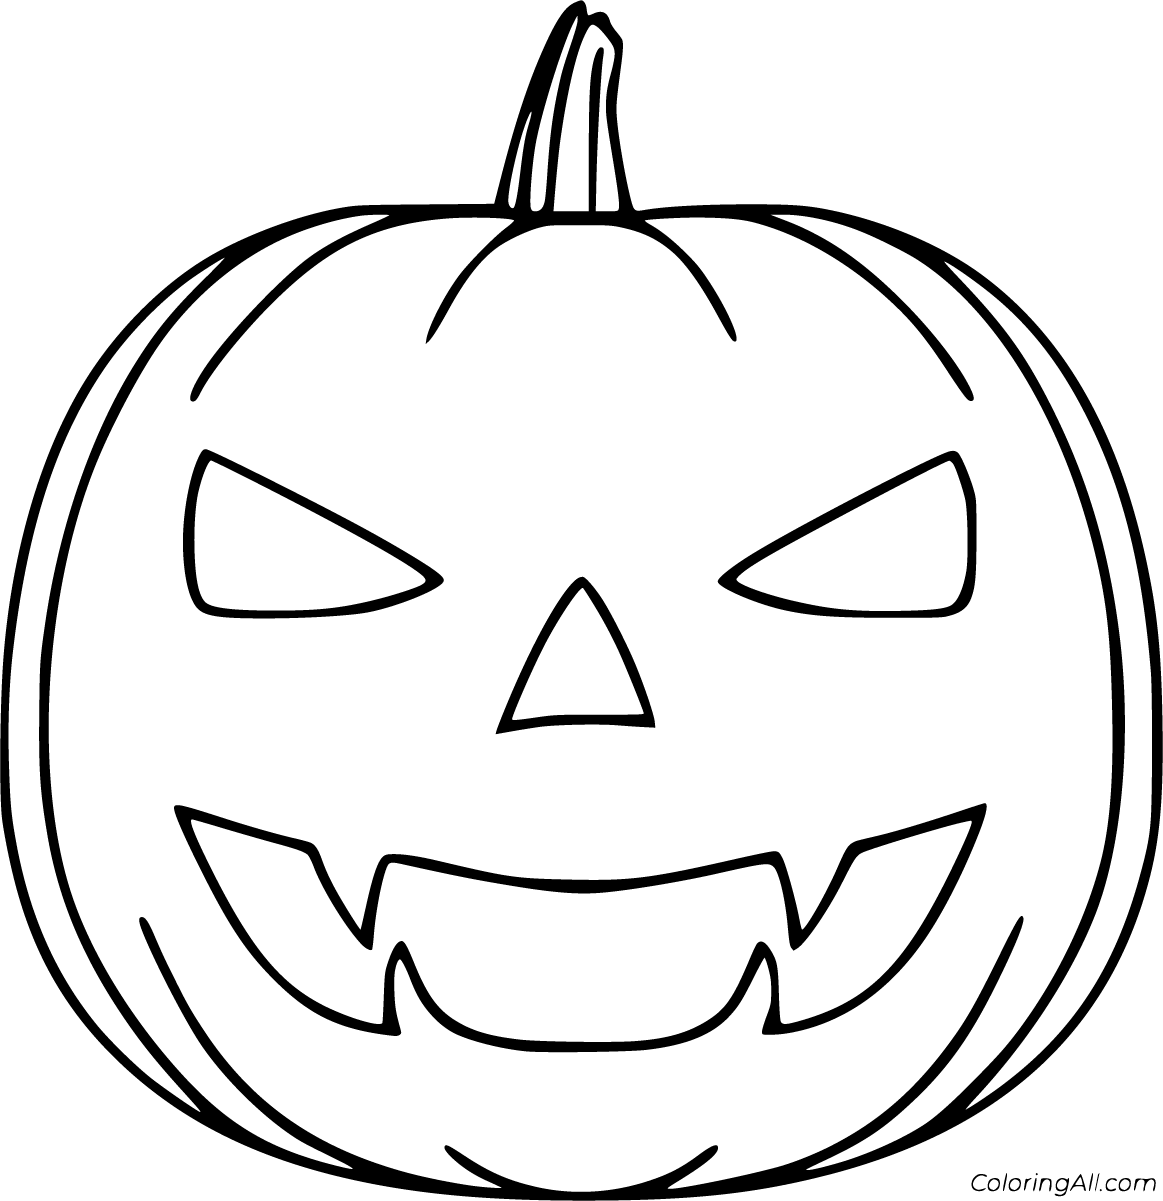 Download Jack O Lantern Coloring Pages - ColoringAll